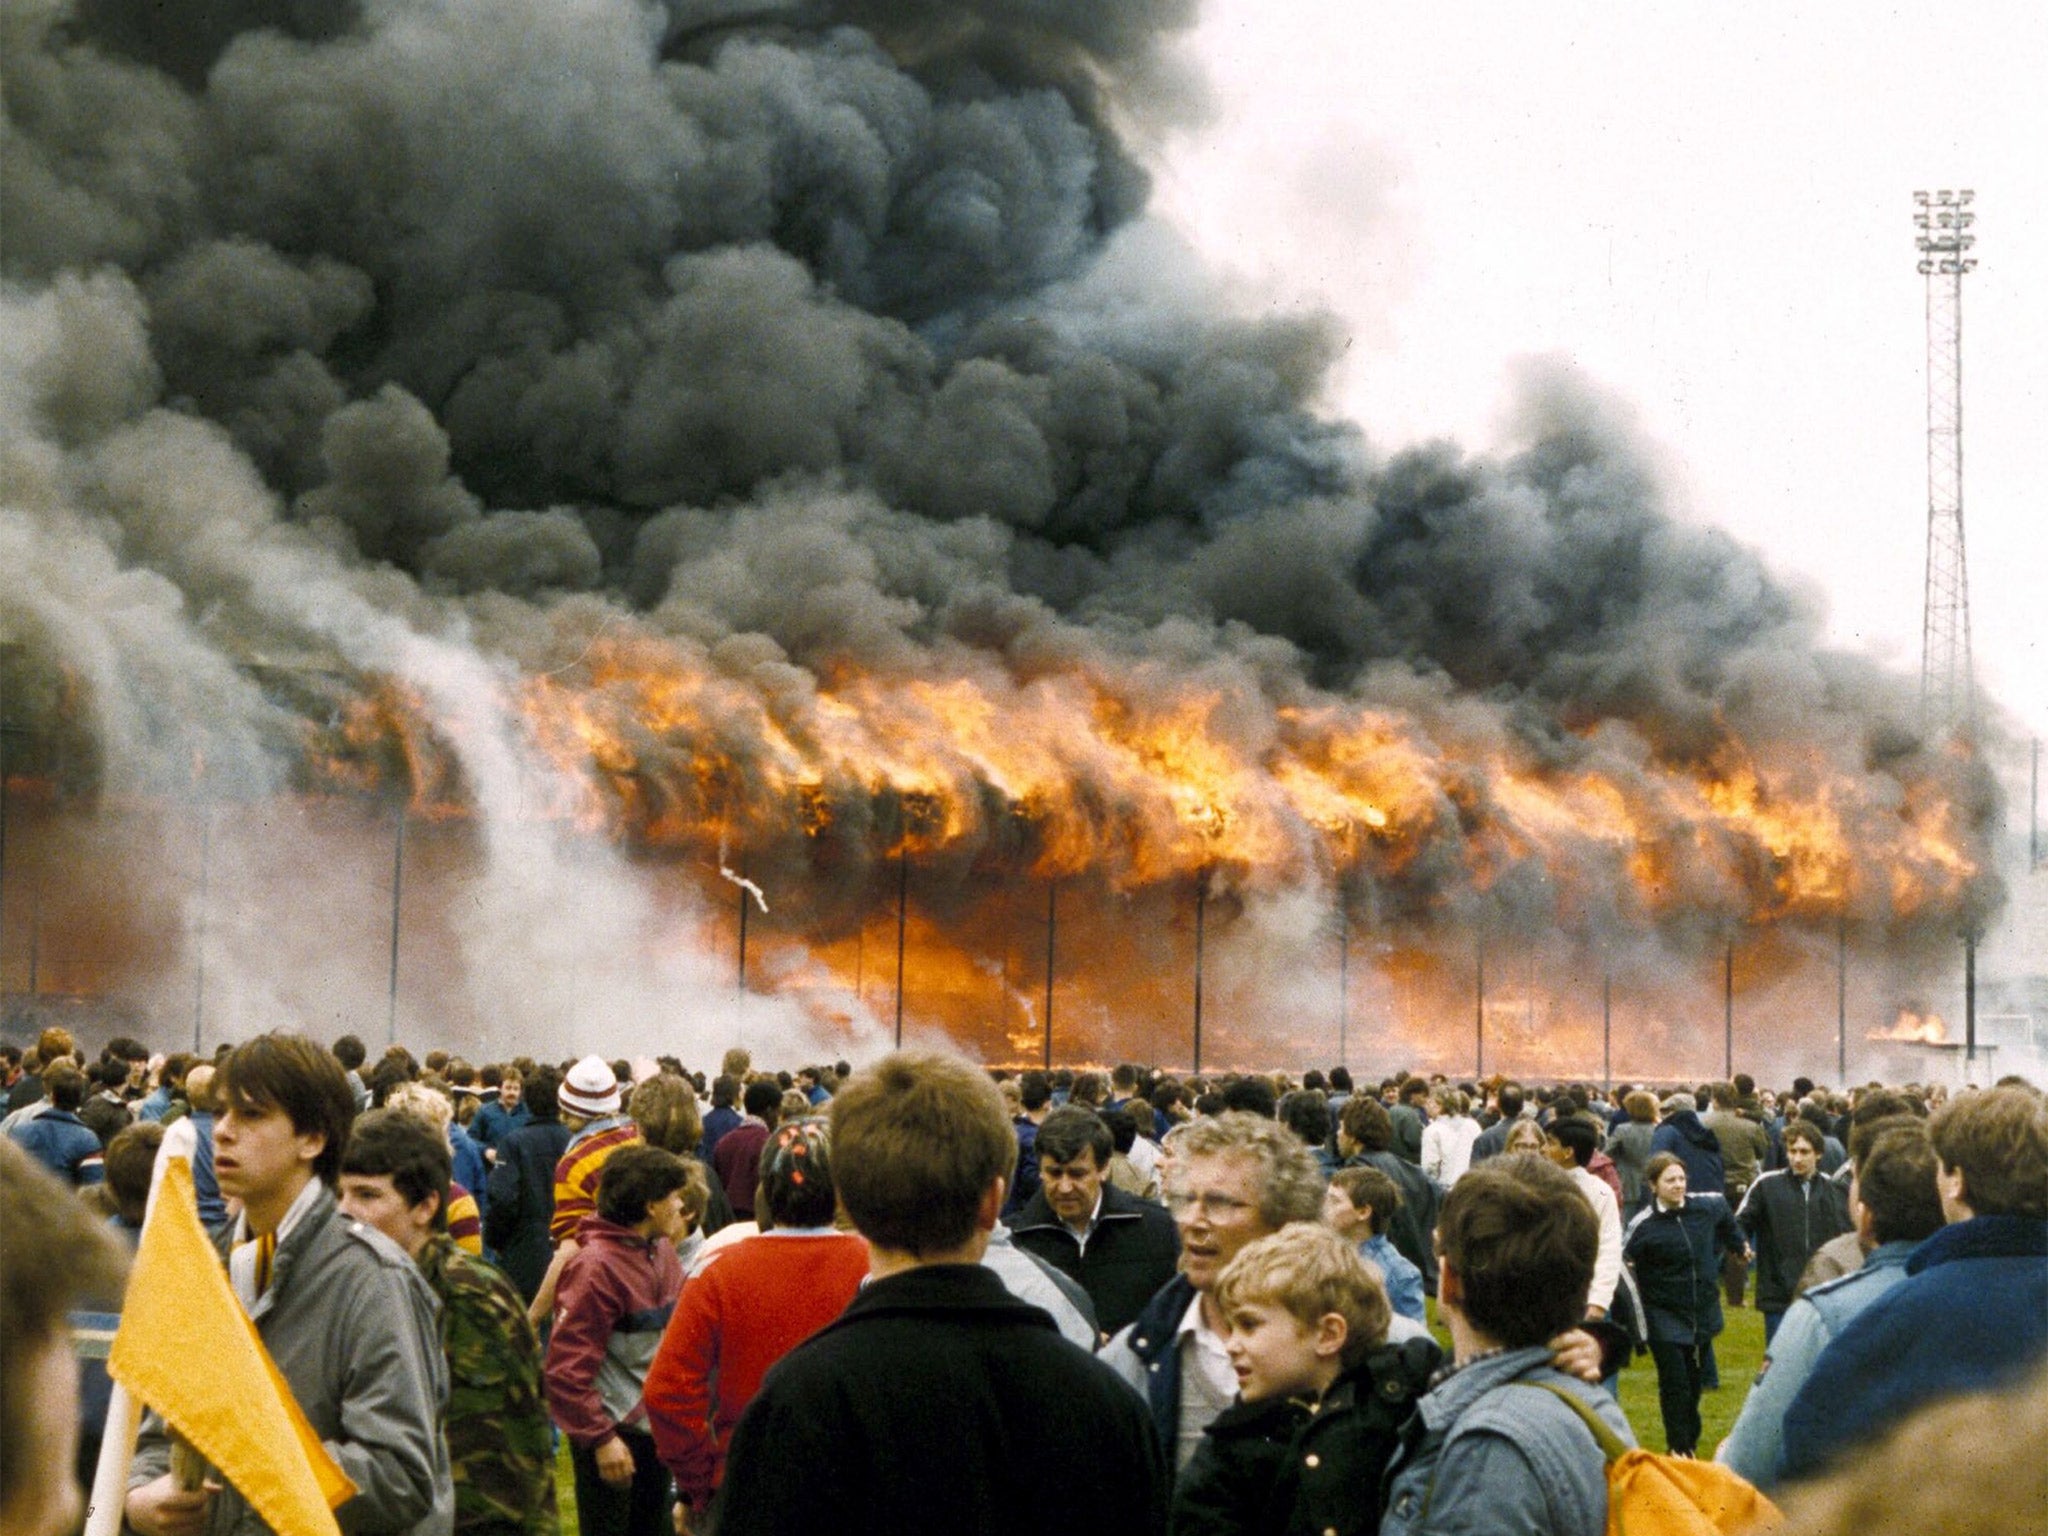 Crowds on the pitch at Valley Parade stadium after the stand caught fire on 11 May 1985. The disaster killed 56 supporters